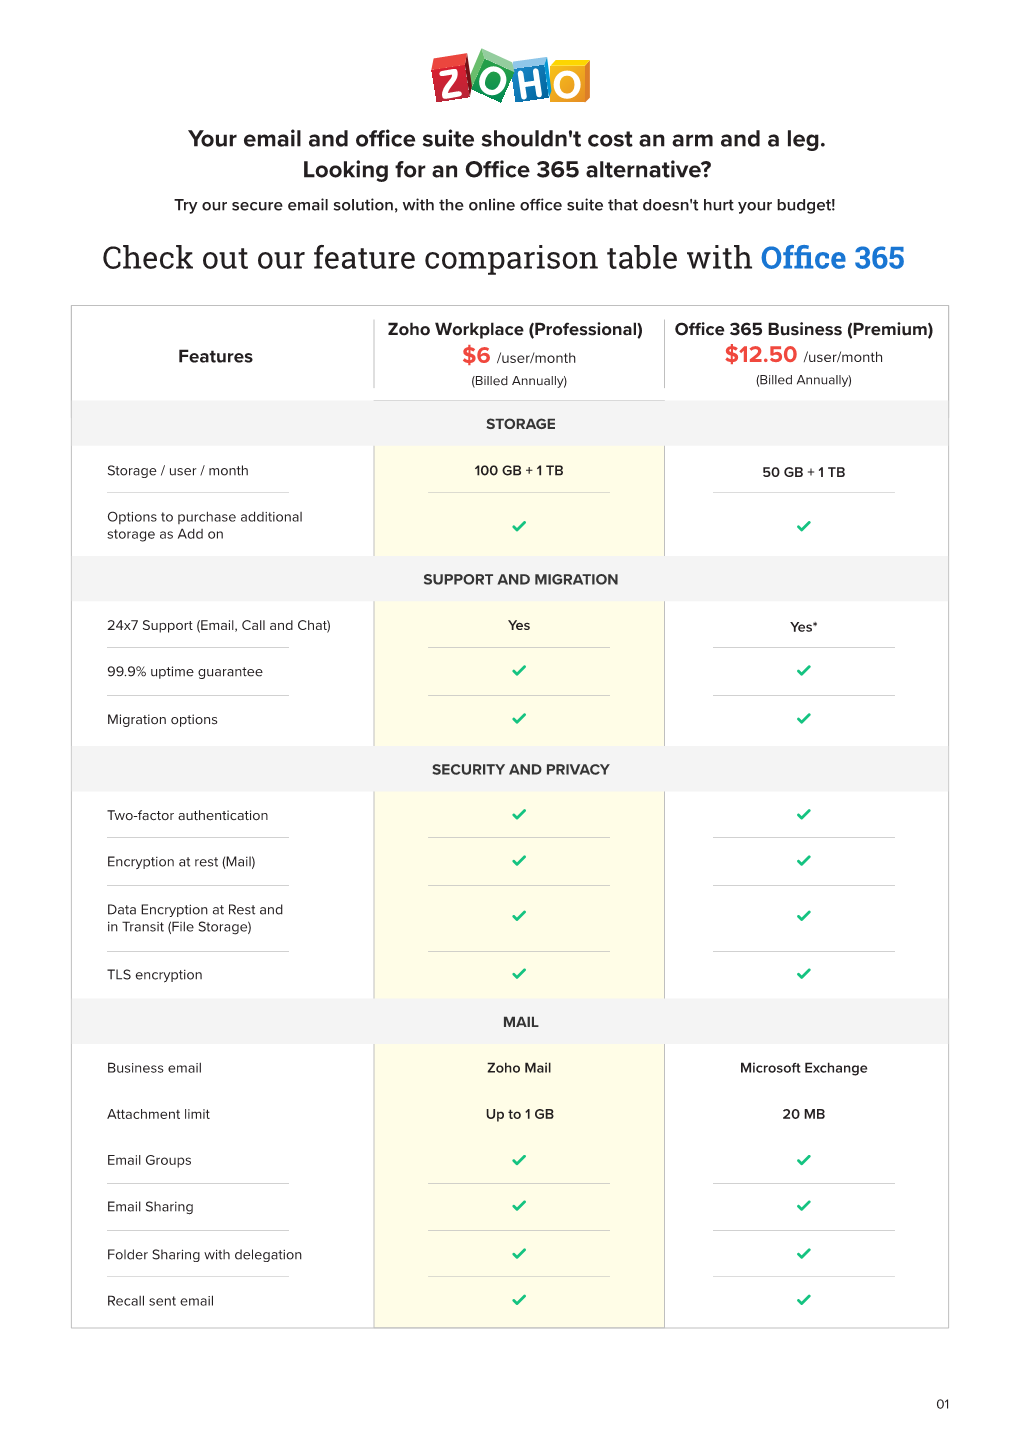 Check out Our Feature Comparison Table With